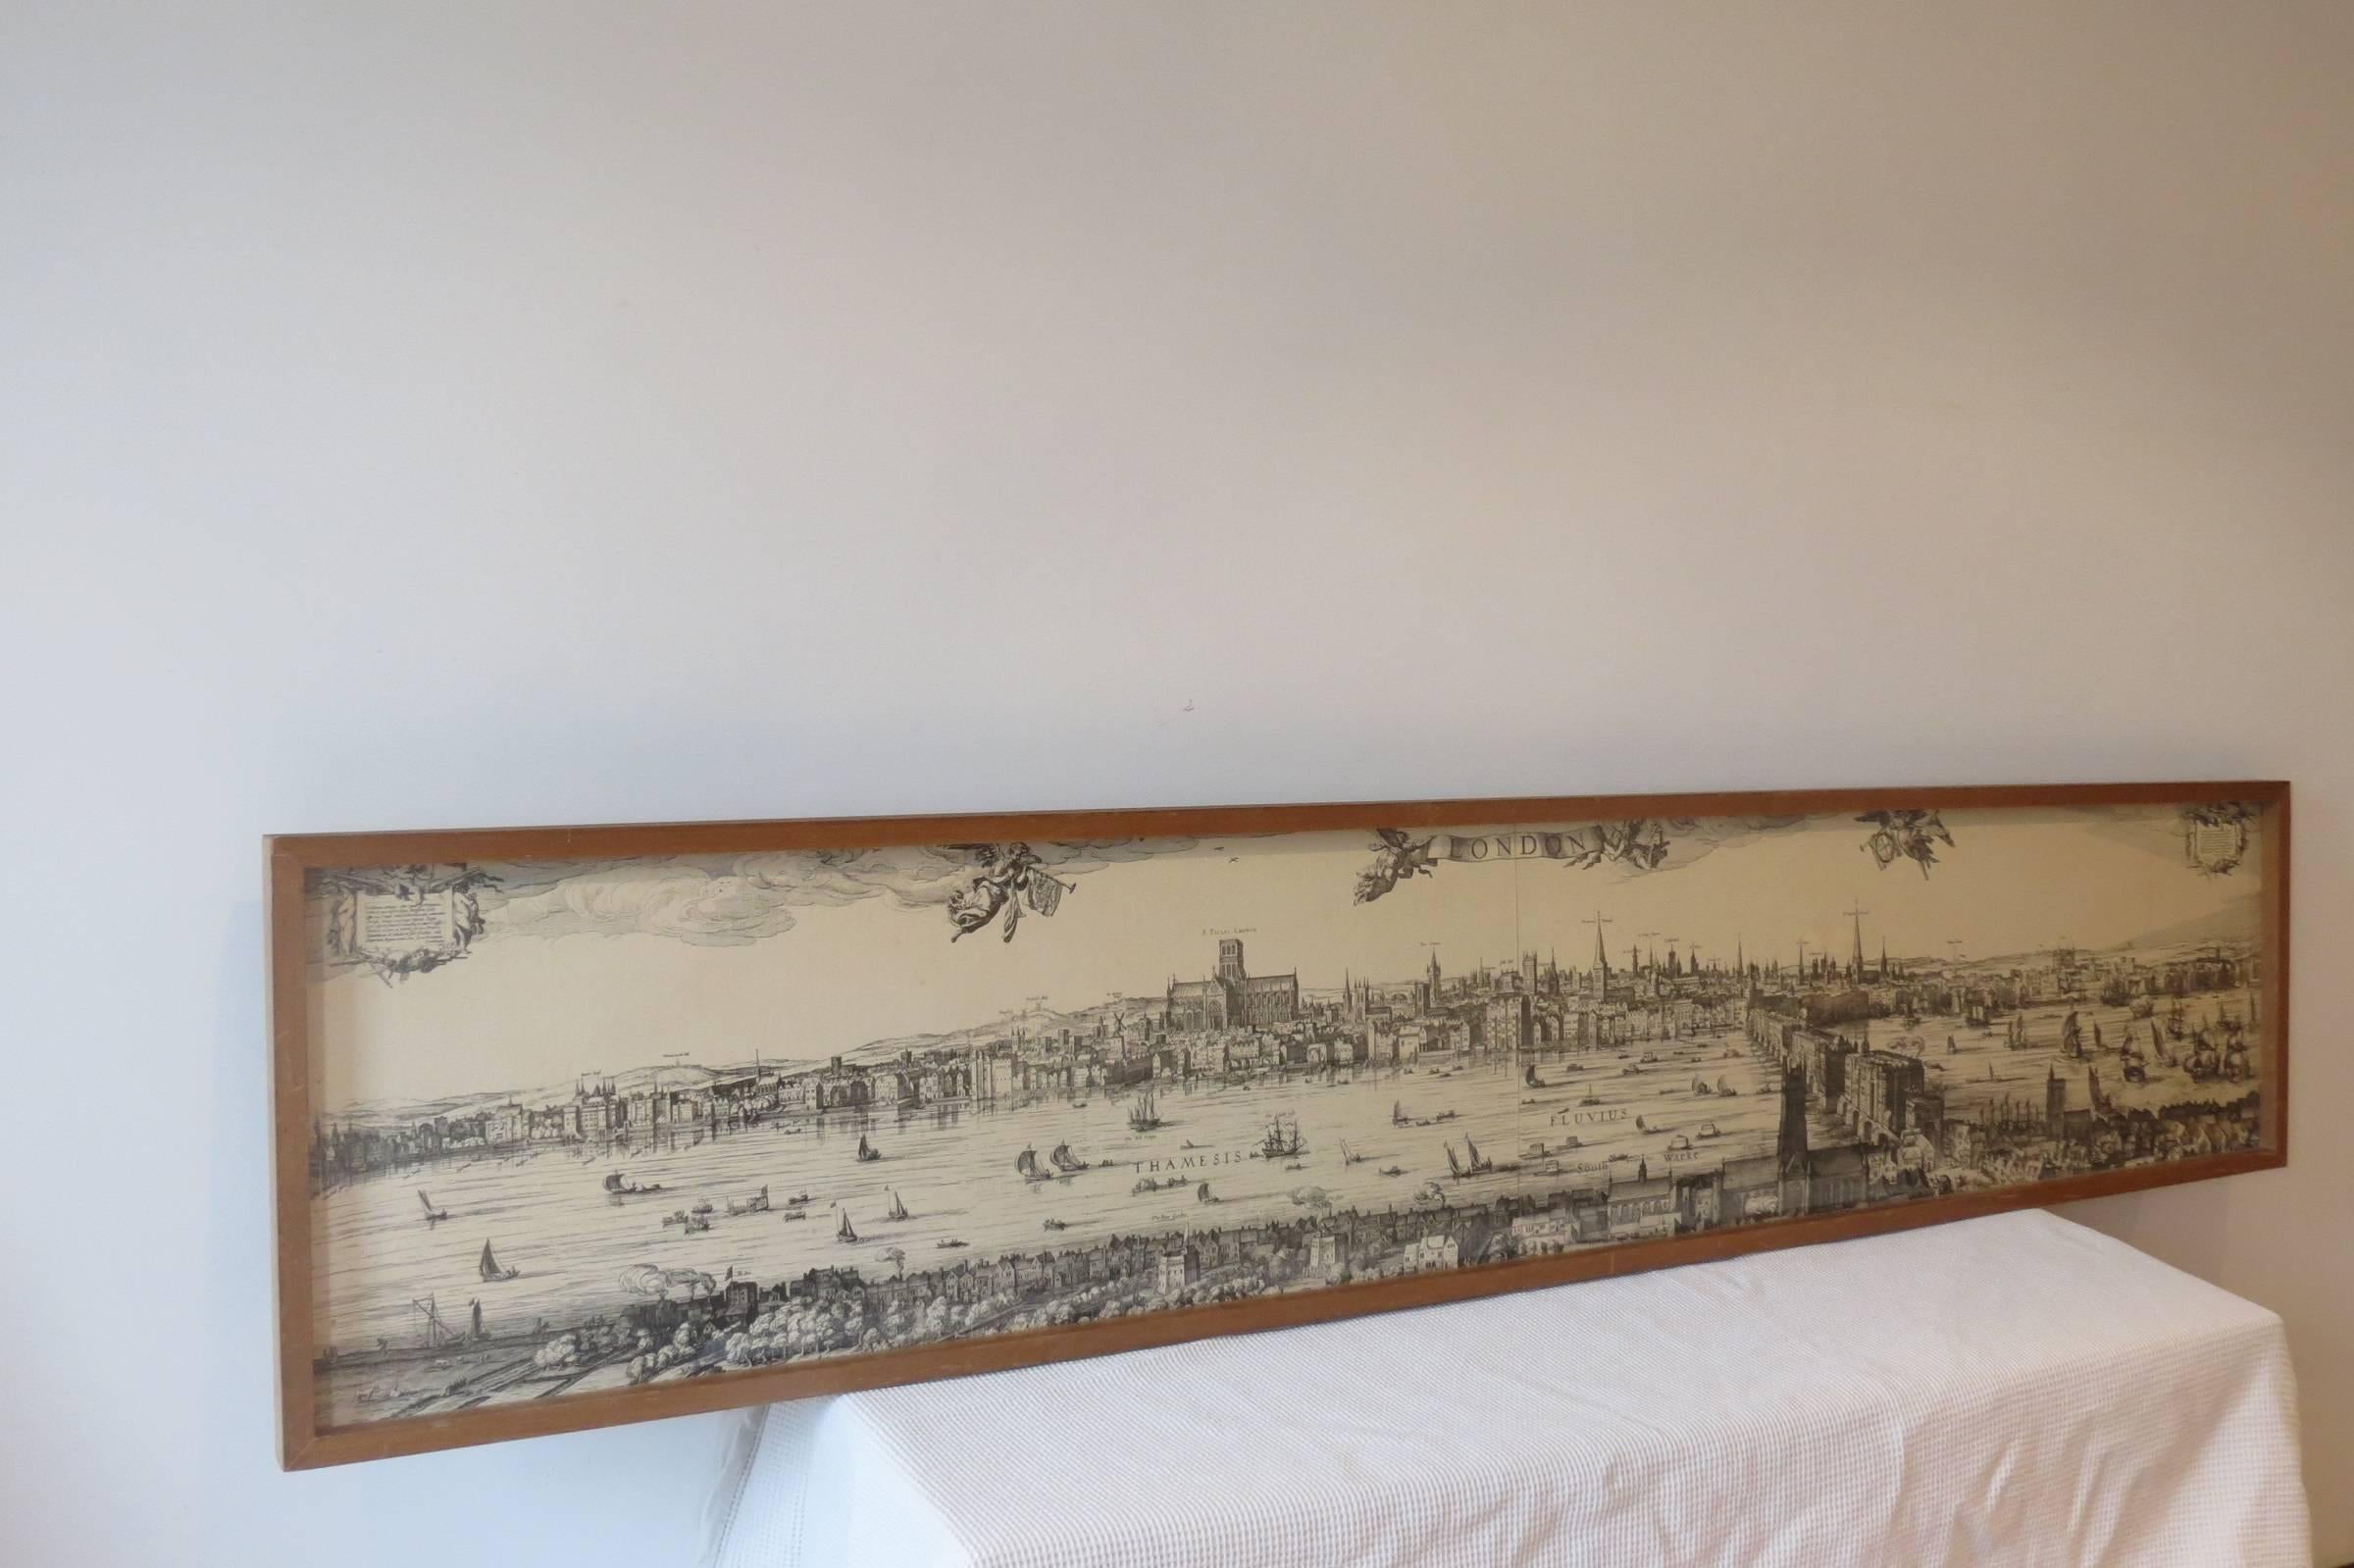 Vintage print of Old London Town. Picture dates from the 1950s and shows Old London Town with the major landmarks. 

Paper on board with plastic film cover and Mahogany frame, plywood back. The paper print is joined in the centre as shown in the